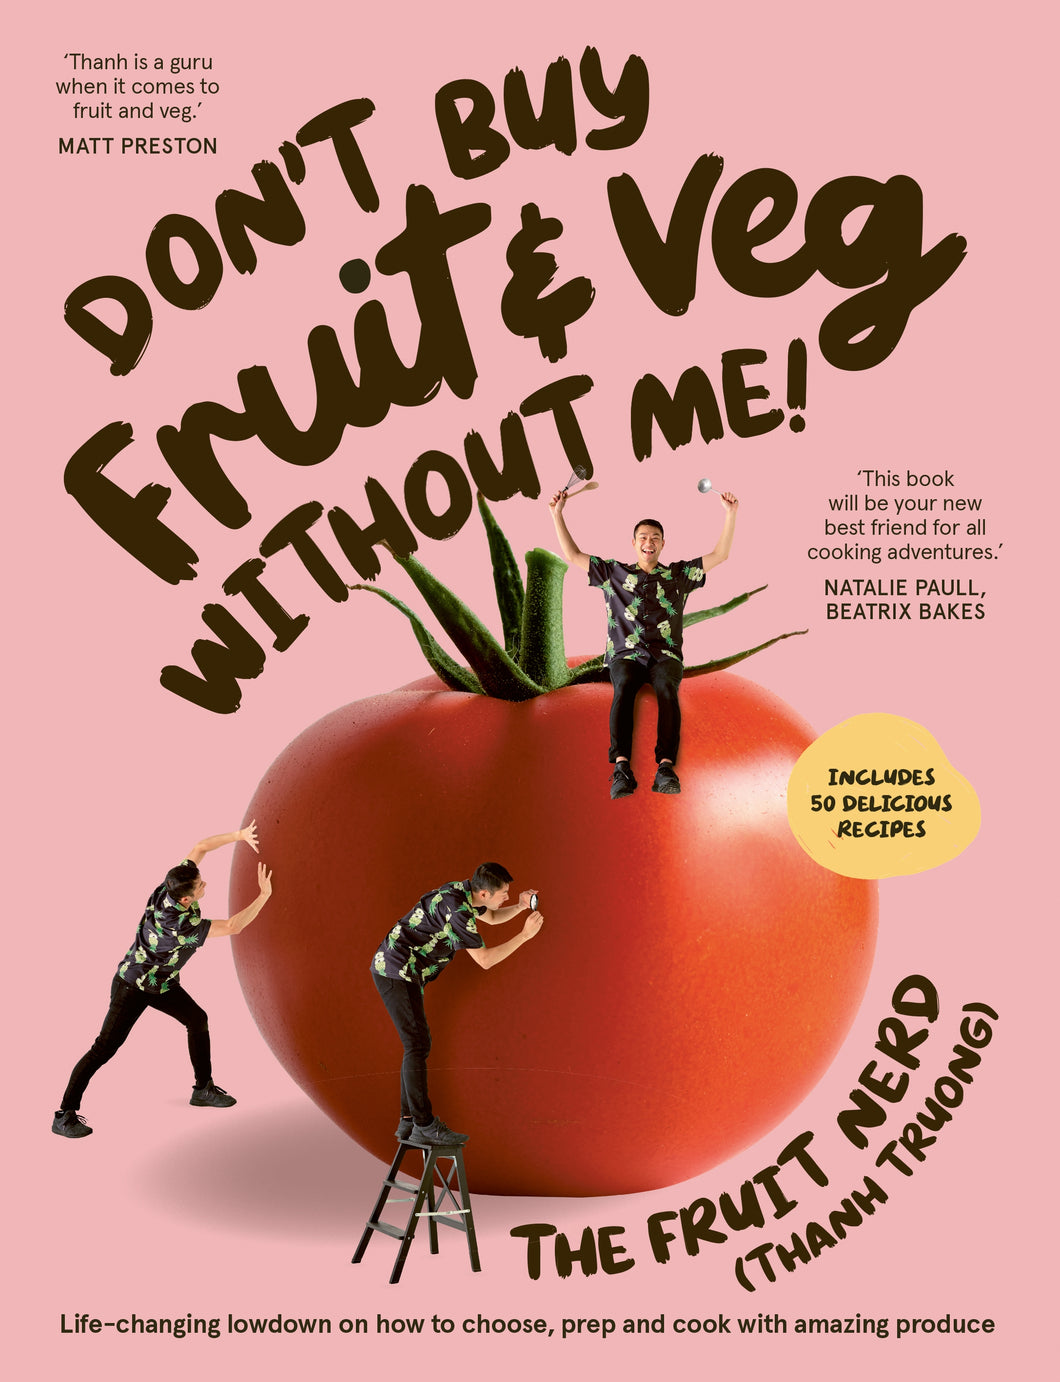 Don't Buy Fruit & Veg Without Me! by Thanh Truong